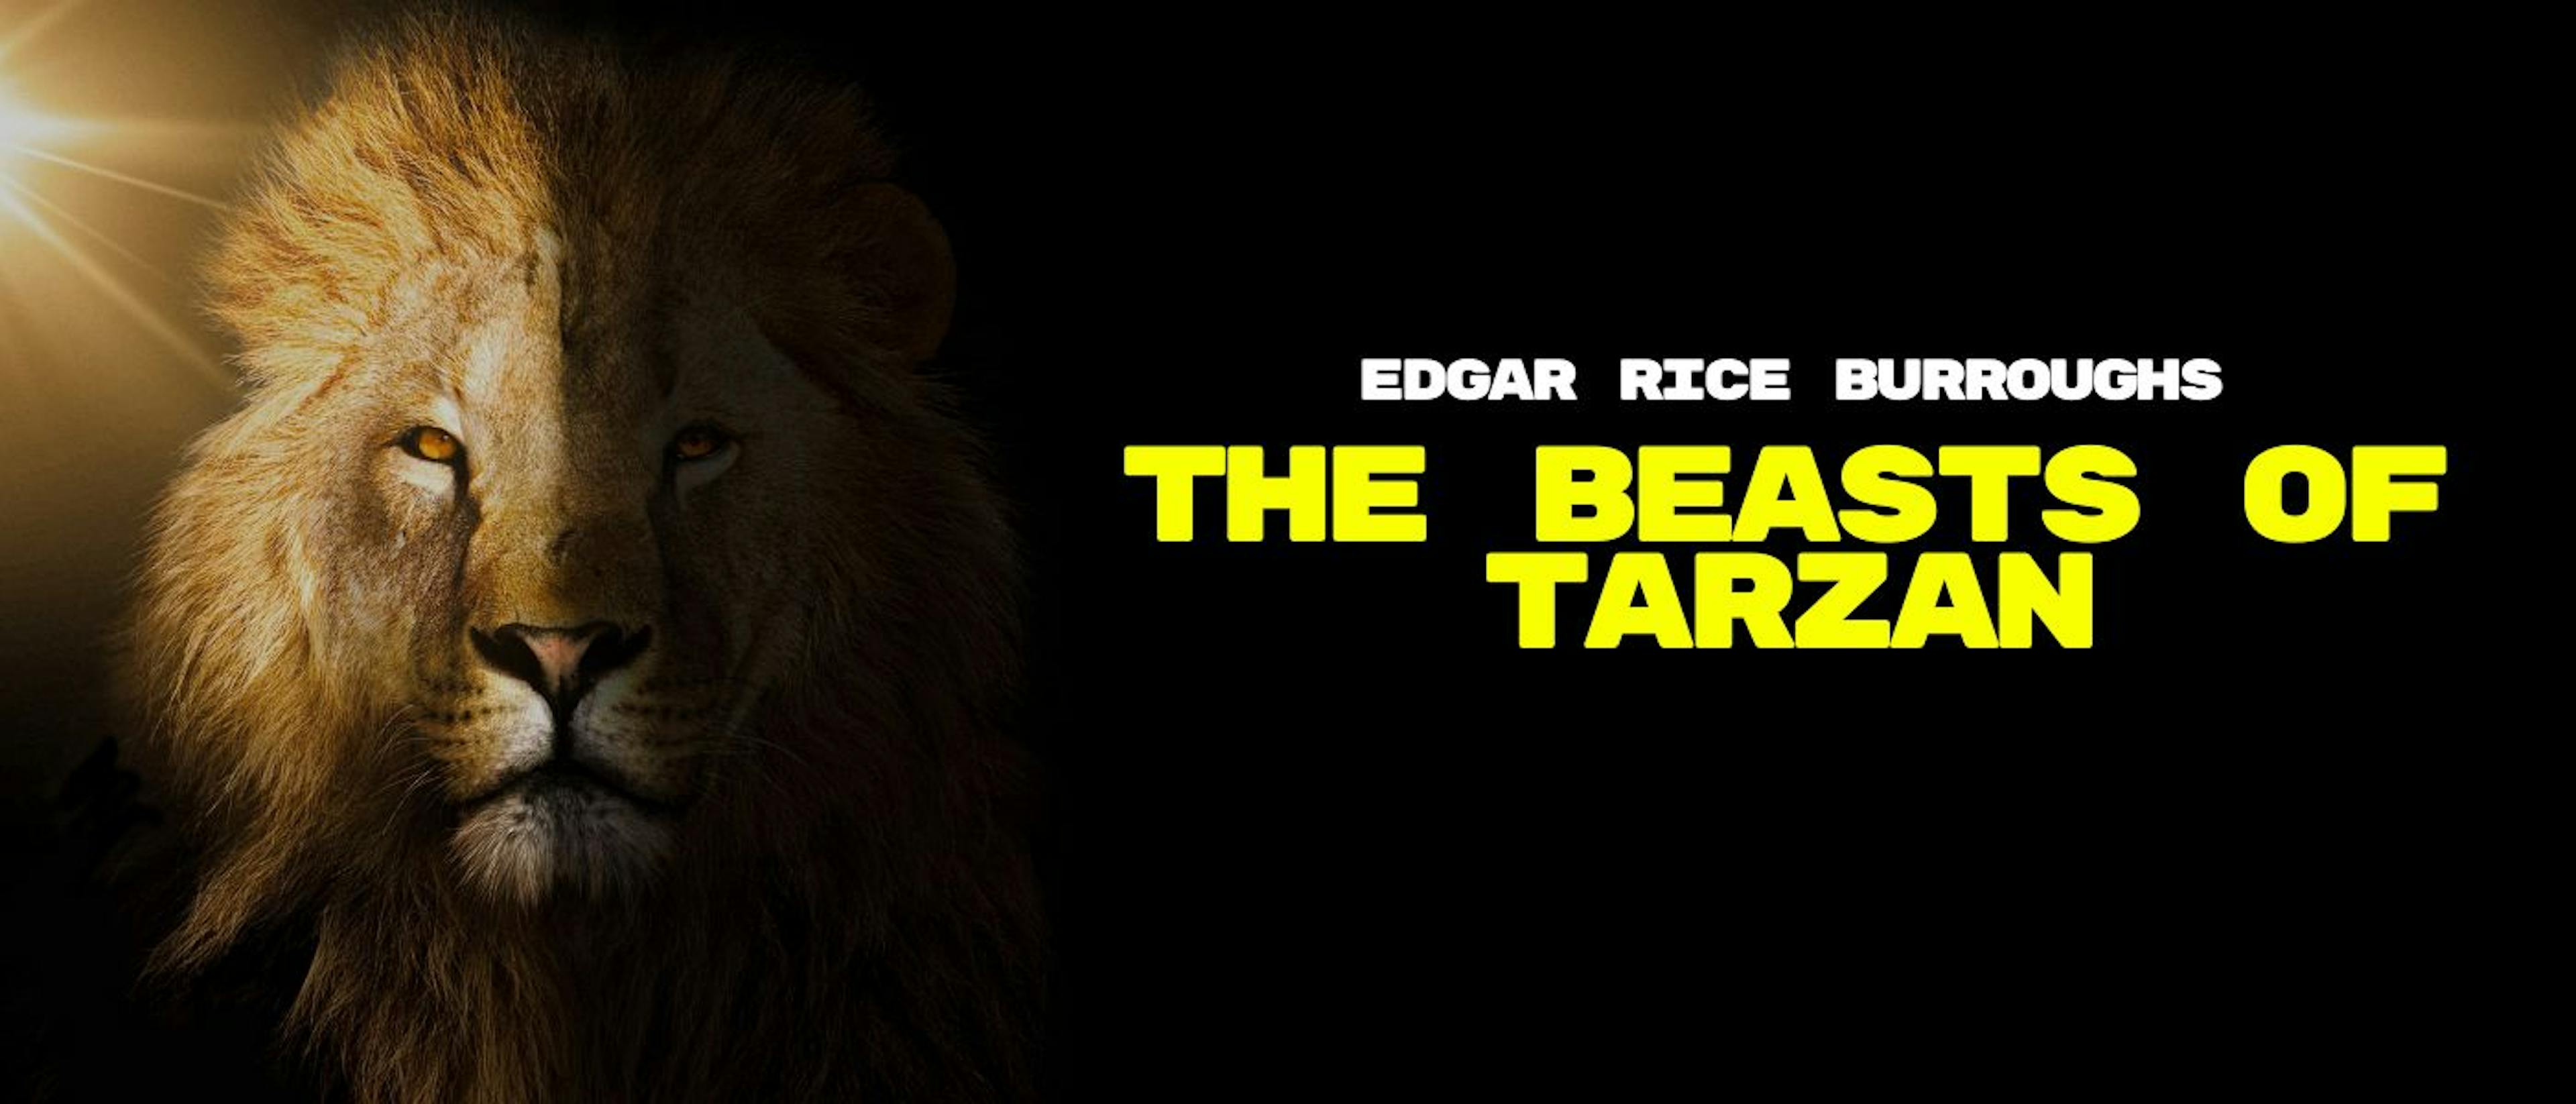 featured image - The Beasts of Tarzan by Edgar Rice Burroughs - Table of Links